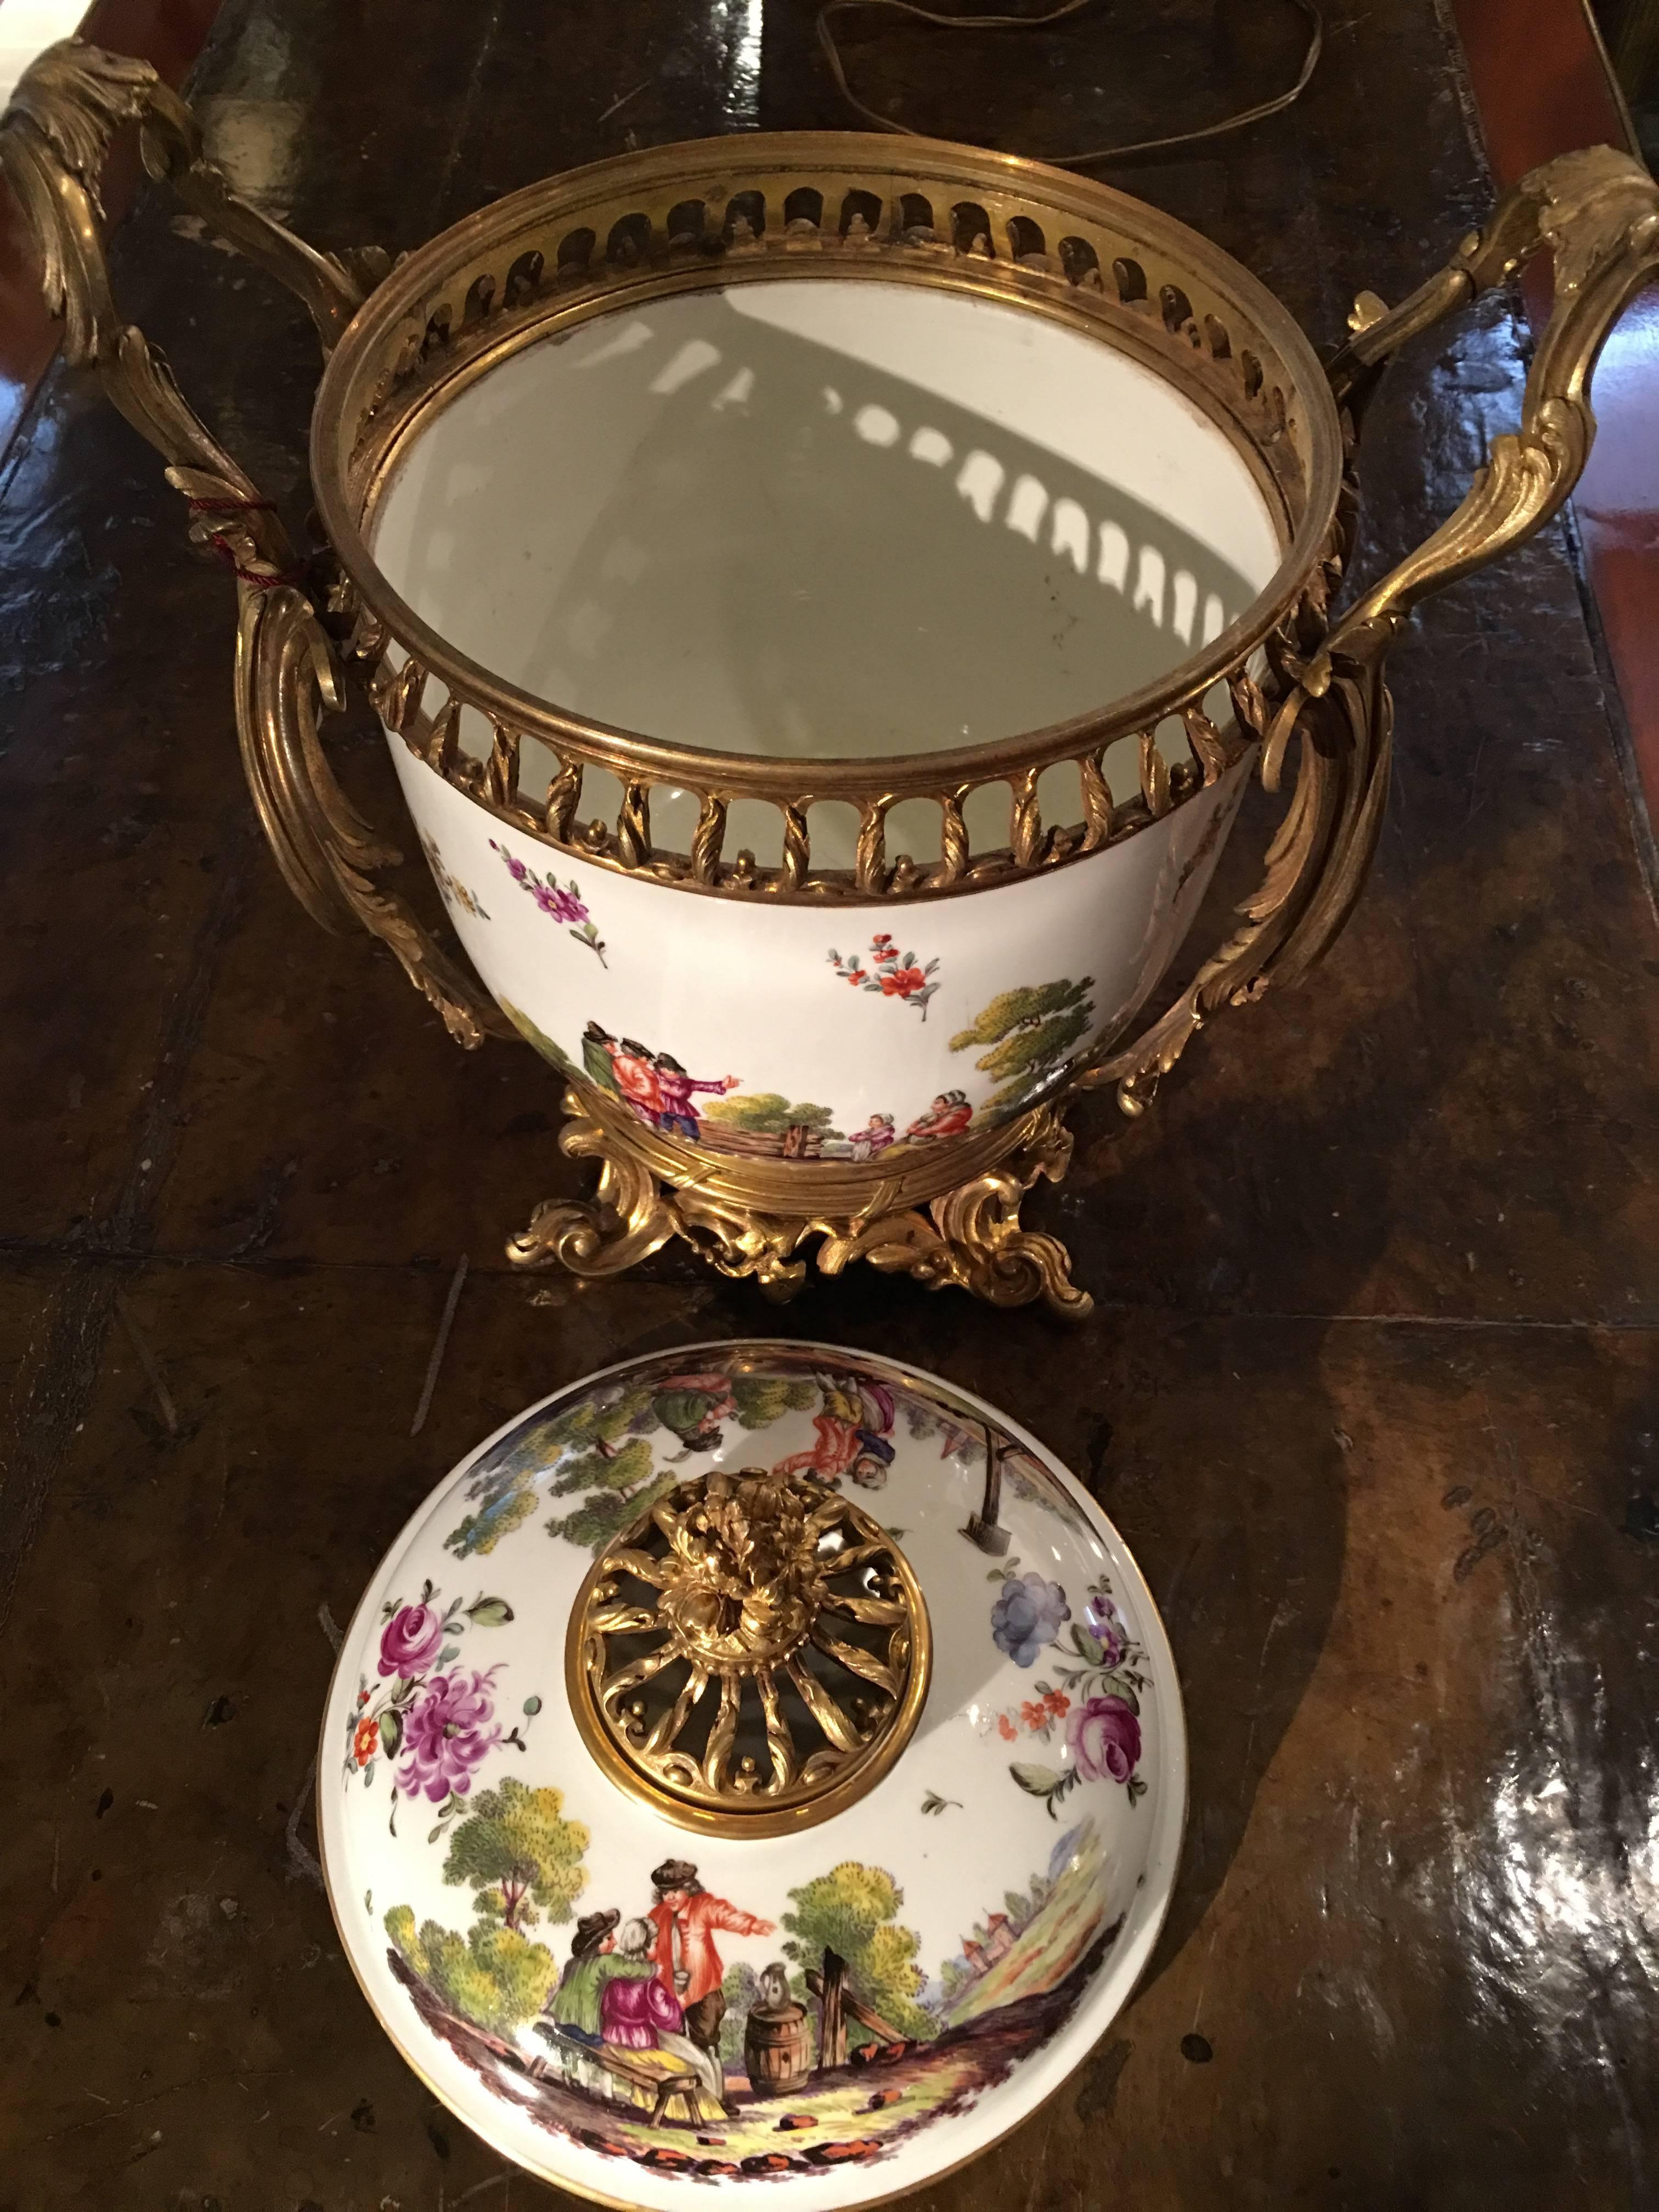 Samson Porcelaine center
mounted in Louis XV style bronze
Late 19th century
Decorated with country scenes.

